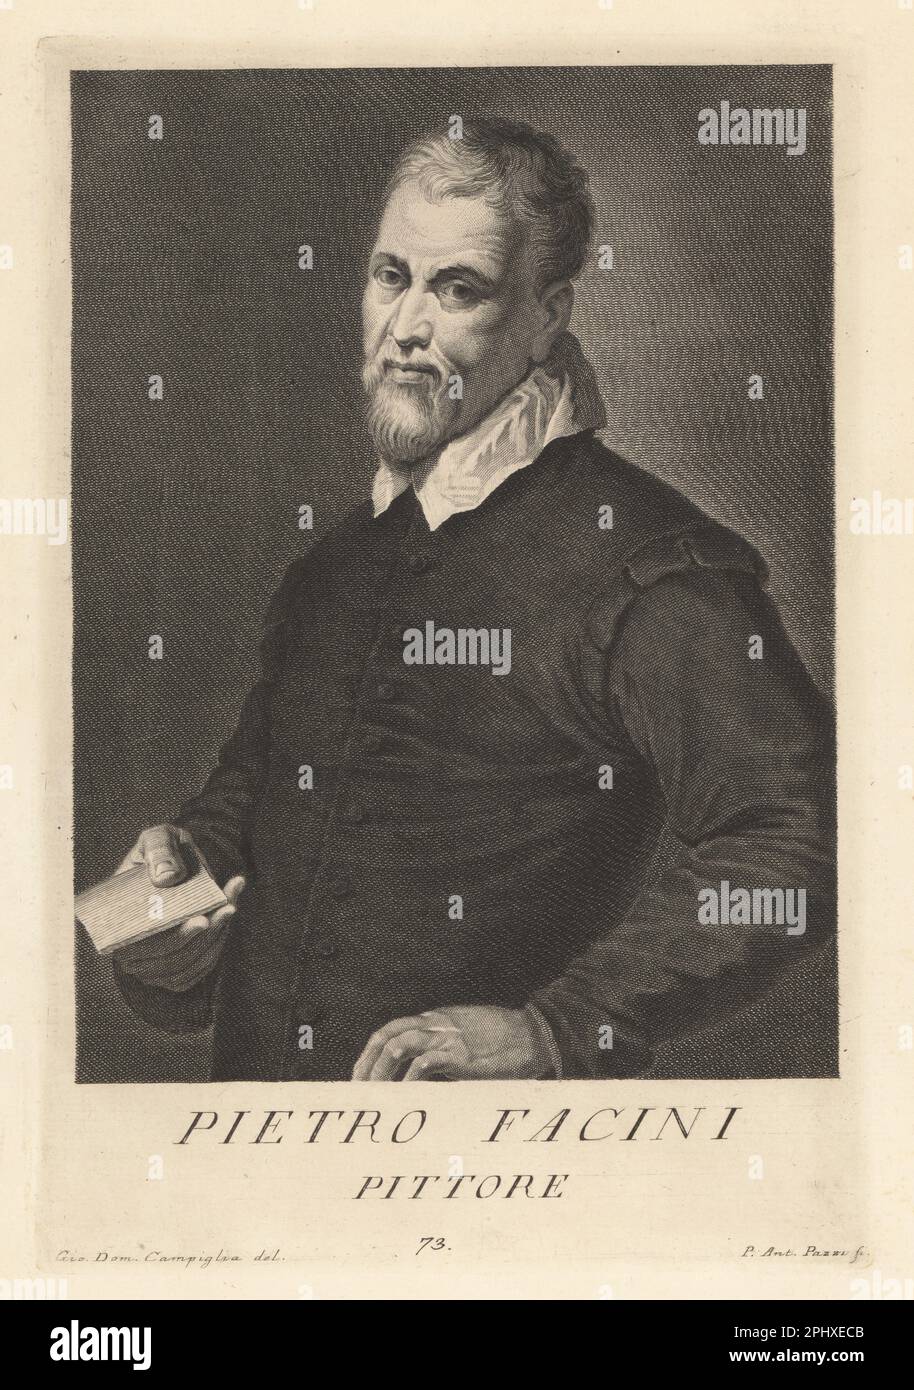 Pietro Faccini, Italian painter, draughtsman and printmaker, 1562–1602. Paintings in Pinacoteca, S. Domenico and S. Paolo in Bologna. Pietro Facini, Pittore. Copperplate engraving by Pietro Antonio Pazzi after Giovanni Domenico Campiglia after a self portrait by the artist from Francesco Moucke's Museo Florentino (Museum Florentinum), Serie di Ritratti de Pittori (Series of Portraits of Painters) stamperia Mouckiana, Florence, 1752-62. Stock Photo